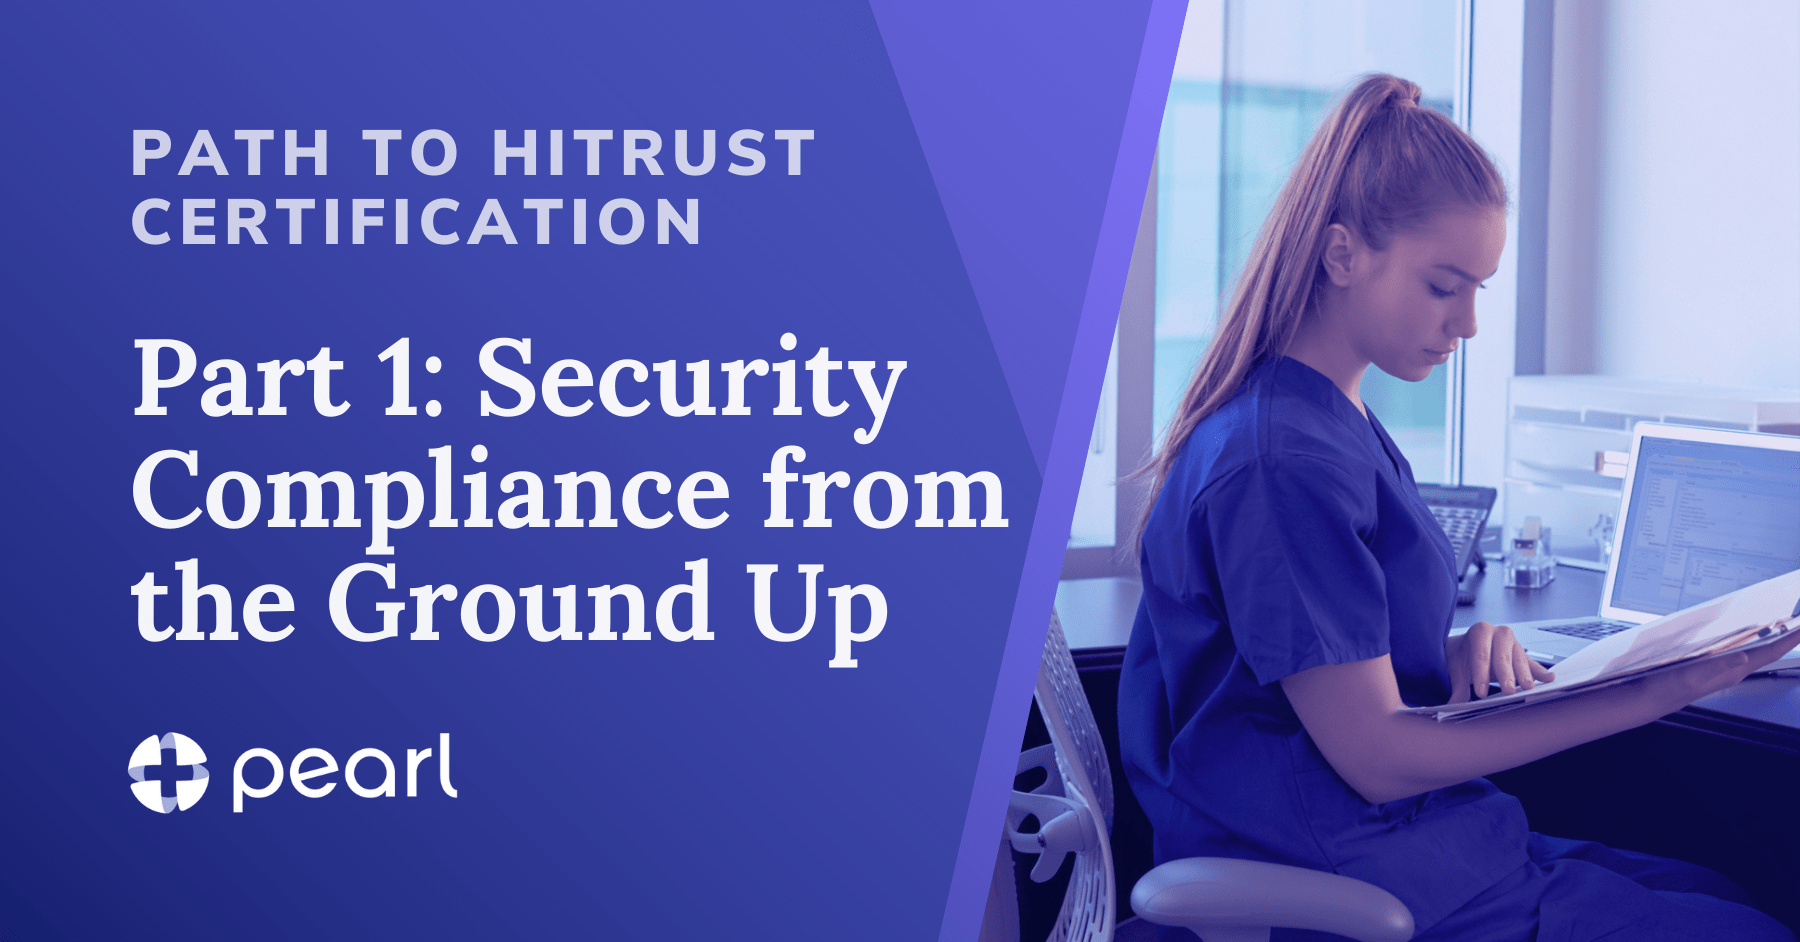 Path to HITRUST Certification Part 1: Security Compliance from the Ground Up